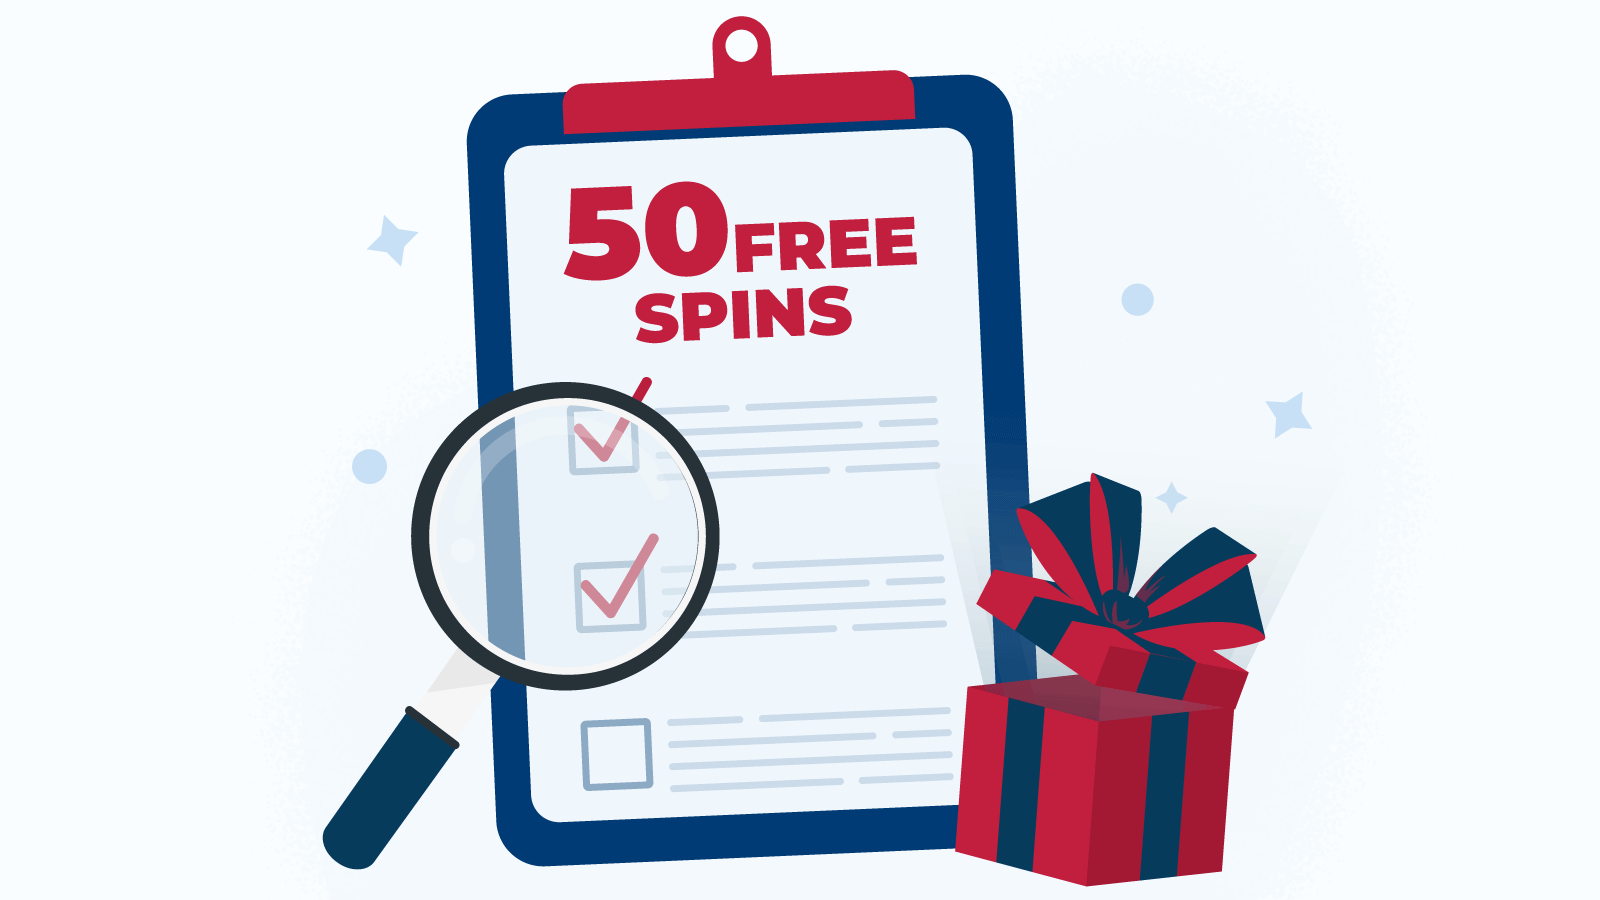 How we chose the top 50 free spins offers in Brazil